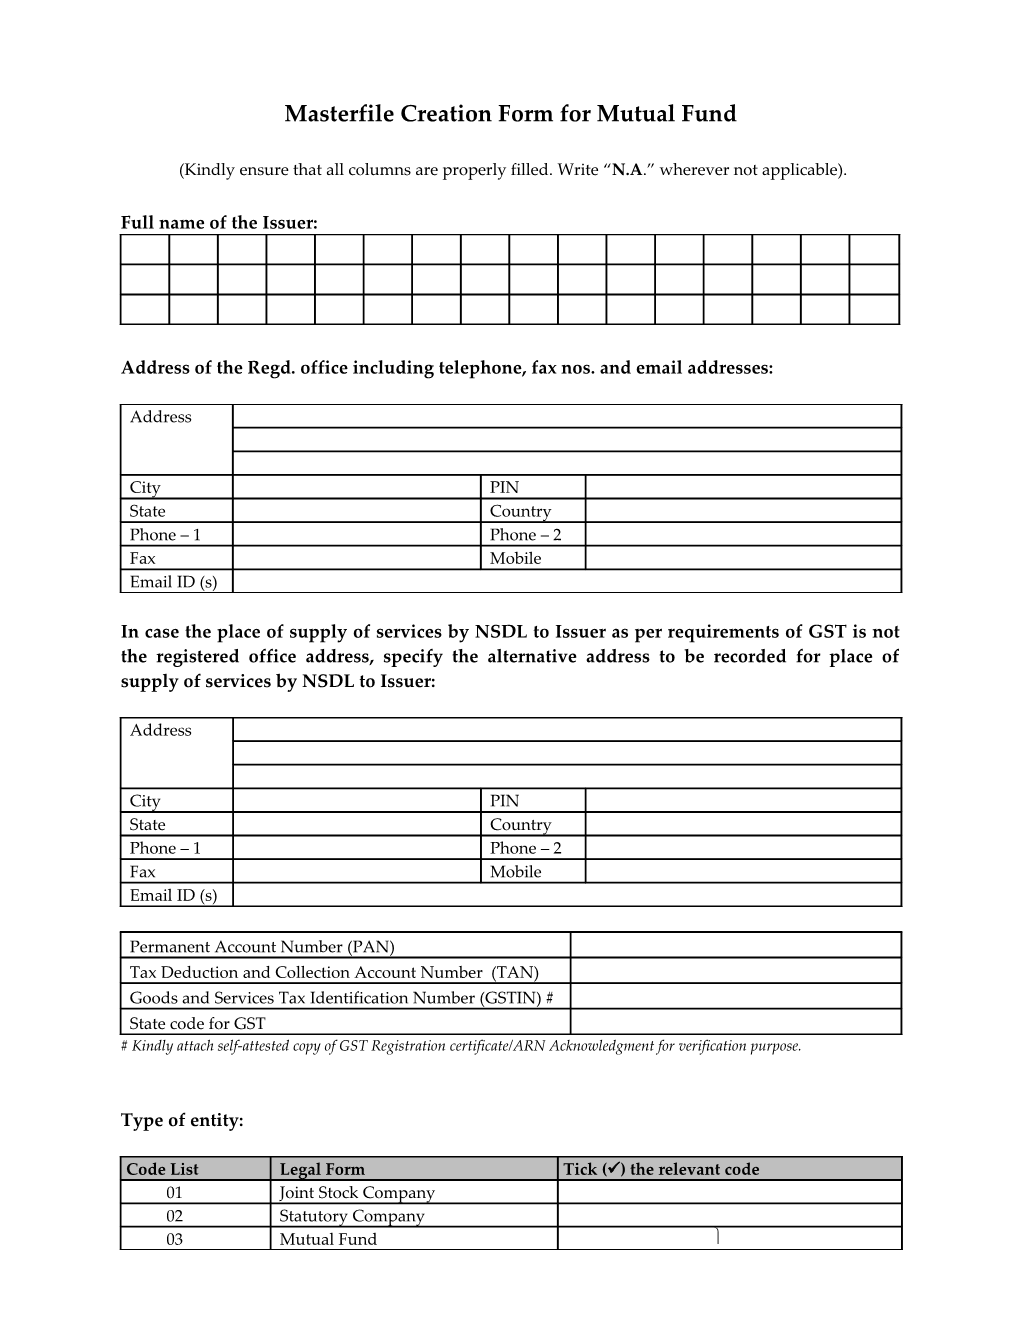 Master File Creation Form for Mutual Fund